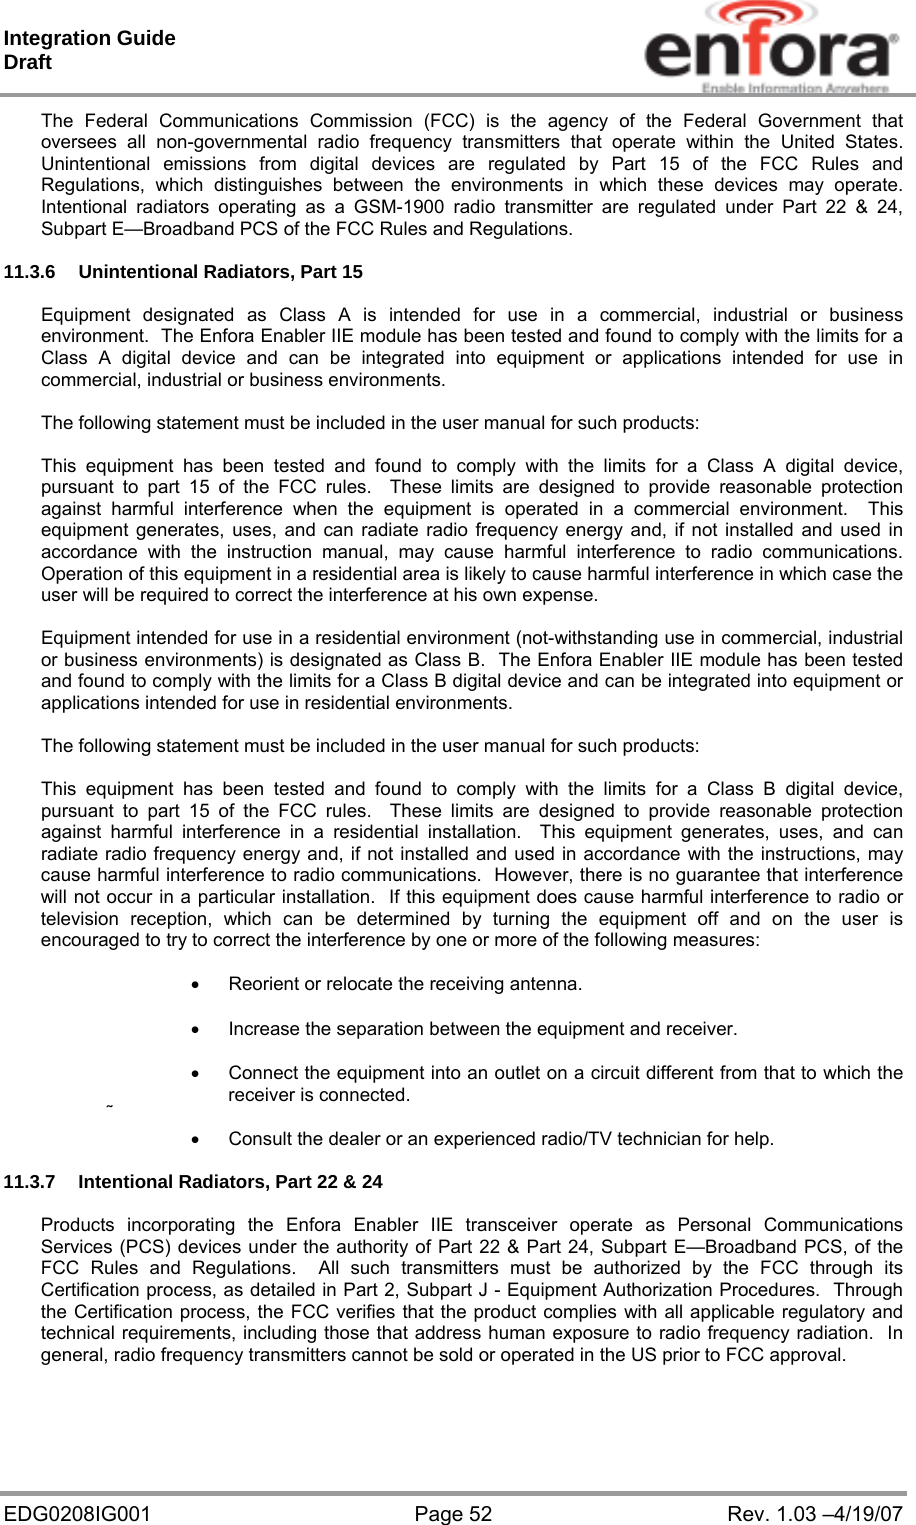 Integration Guide  Draft EDG0208IG001  Page 52  Rev. 1.03 –4/19/07 The Federal Communications Commission (FCC) is the agency of the Federal Government that oversees all non-governmental radio frequency transmitters that operate within the United States.  Unintentional emissions from digital devices are regulated by Part 15 of the FCC Rules and Regulations, which distinguishes between the environments in which these devices may operate.  Intentional radiators operating as a GSM-1900 radio transmitter are regulated under Part 22 &amp; 24, Subpart E—Broadband PCS of the FCC Rules and Regulations.  11.3.6  Unintentional Radiators, Part 15  Equipment designated as Class A is intended for use in a commercial, industrial or business environment.  The Enfora Enabler IIE module has been tested and found to comply with the limits for a Class A digital device and can be integrated into equipment or applications intended for use in commercial, industrial or business environments.  The following statement must be included in the user manual for such products:  This equipment has been tested and found to comply with the limits for a Class A digital device, pursuant to part 15 of the FCC rules.  These limits are designed to provide reasonable protection against harmful interference when the equipment is operated in a commercial environment.  This equipment generates, uses, and can radiate radio frequency energy and, if not installed and used in accordance with the instruction manual, may cause harmful interference to radio communications.  Operation of this equipment in a residential area is likely to cause harmful interference in which case the user will be required to correct the interference at his own expense.  Equipment intended for use in a residential environment (not-withstanding use in commercial, industrial or business environments) is designated as Class B.  The Enfora Enabler IIE module has been tested and found to comply with the limits for a Class B digital device and can be integrated into equipment or applications intended for use in residential environments.  The following statement must be included in the user manual for such products:  This equipment has been tested and found to comply with the limits for a Class B digital device, pursuant to part 15 of the FCC rules.  These limits are designed to provide reasonable protection against harmful interference in a residential installation.  This equipment generates, uses, and can radiate radio frequency energy and, if not installed and used in accordance with the instructions, may cause harmful interference to radio communications.  However, there is no guarantee that interference will not occur in a particular installation.  If this equipment does cause harmful interference to radio or television reception, which can be determined by turning the equipment off and on the user is encouraged to try to correct the interference by one or more of the following measures:    Reorient or relocate the receiving antenna.    Increase the separation between the equipment and receiver.    Connect the equipment into an outlet on a circuit different from that to which the receiver is connected.    Consult the dealer or an experienced radio/TV technician for help.  11.3.7  Intentional Radiators, Part 22 &amp; 24  Products incorporating the Enfora Enabler IIE transceiver operate as Personal Communications Services (PCS) devices under the authority of Part 22 &amp; Part 24, Subpart E—Broadband PCS, of the FCC Rules and Regulations.  All such transmitters must be authorized by the FCC through its Certification process, as detailed in Part 2, Subpart J - Equipment Authorization Procedures.  Through the Certification process, the FCC verifies that the product complies with all applicable regulatory and technical requirements, including those that address human exposure to radio frequency radiation.  In general, radio frequency transmitters cannot be sold or operated in the US prior to FCC approval.  